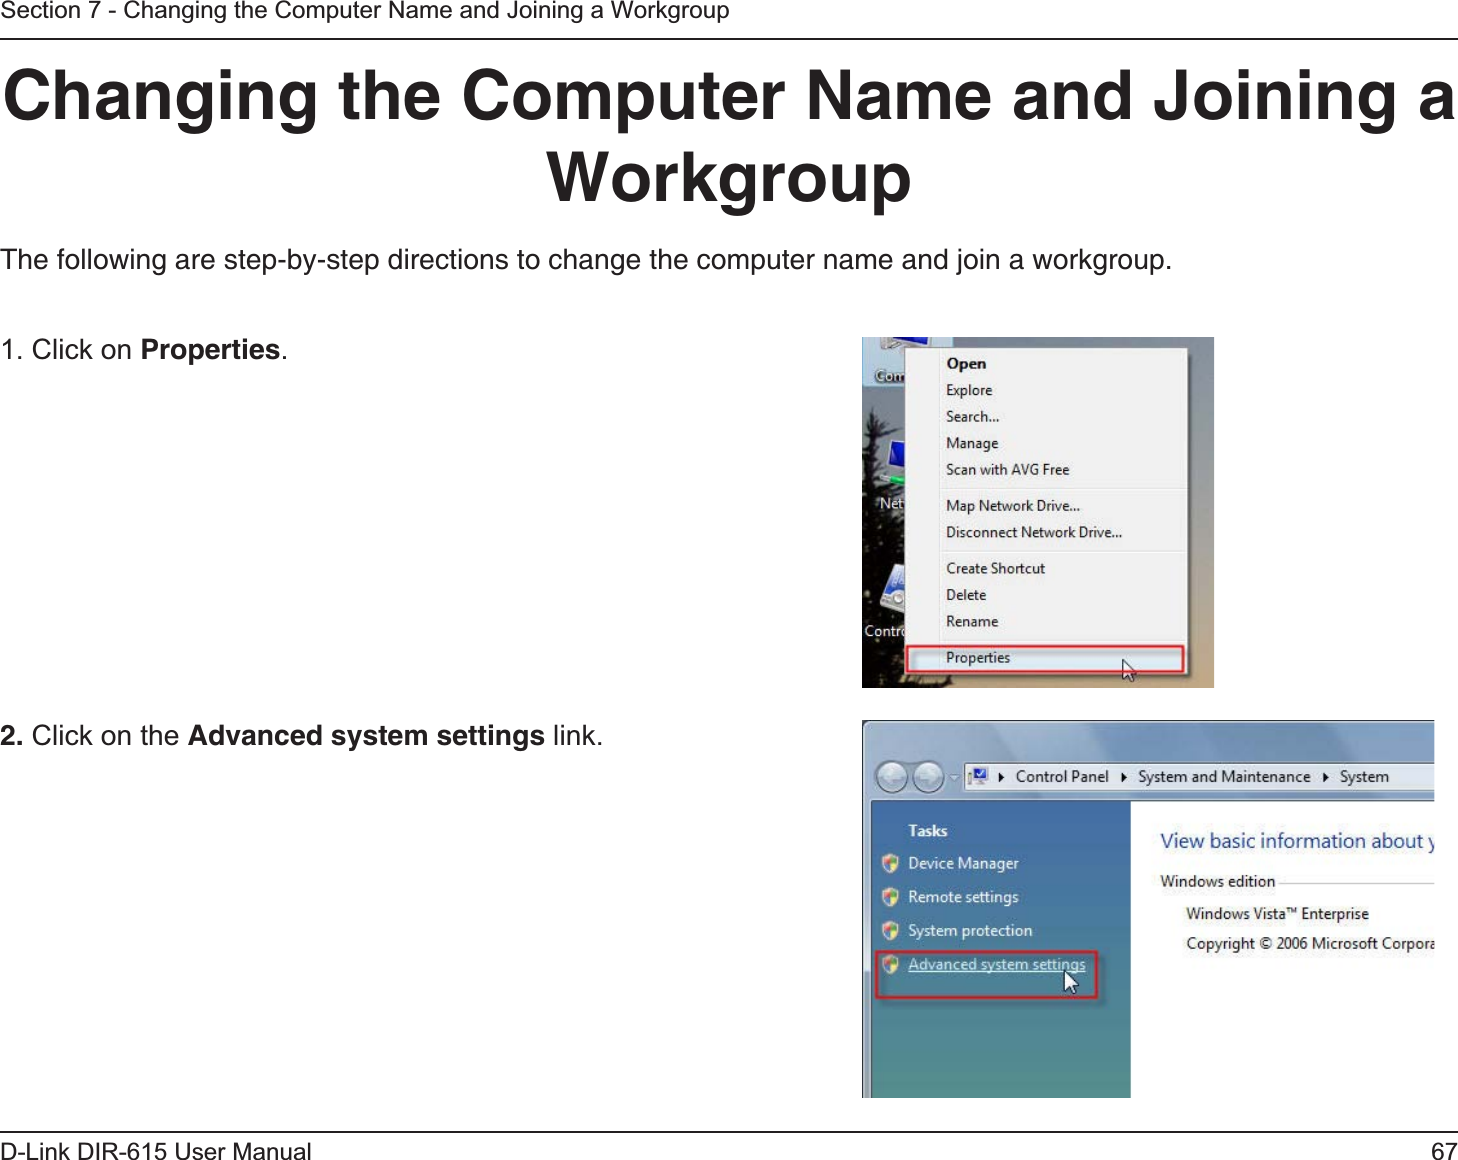 67D-Link DIR-615 User ManualSection 7 - Changing the Computer Name and Joining a WorkgroupChanging the Computer Name and Joining a WorkgroupThe following are step-by-step directions to change the computer name and join a workgroup.2. Click on the Advanced system settings link. 1. Click on Properties.     